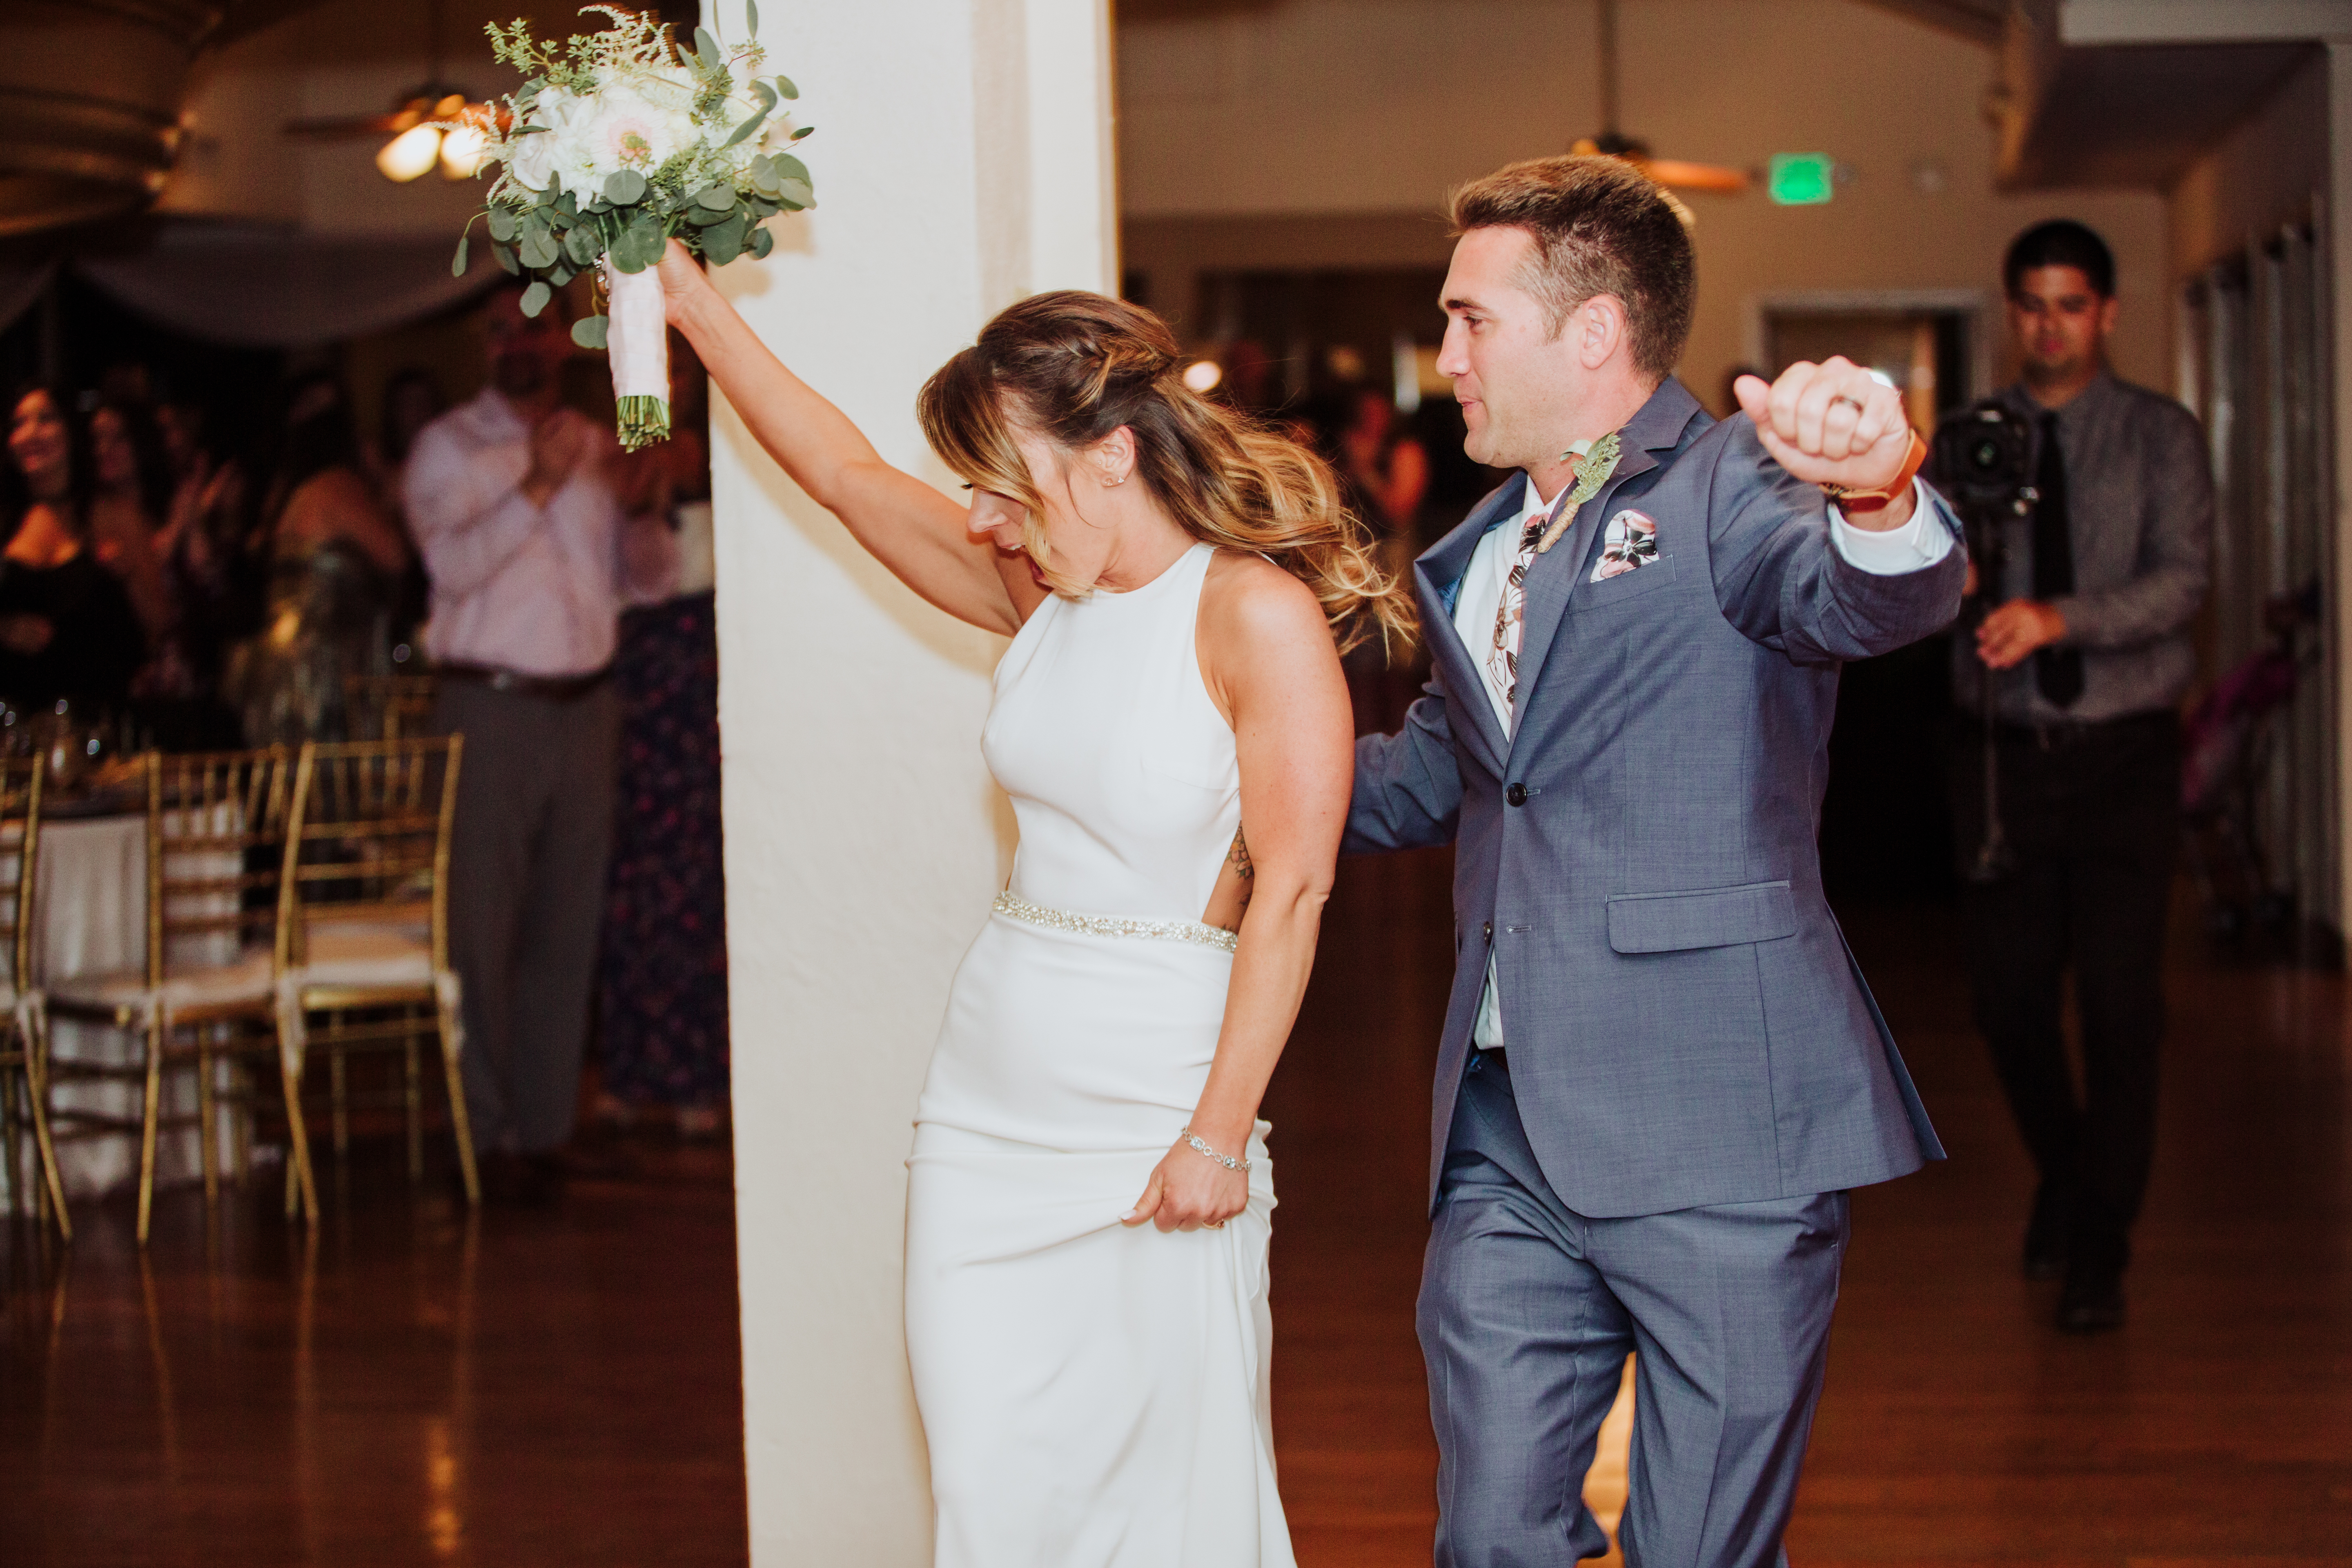 Bride and groom grand entranceat a Romantic Style San Diego Wedding at Marina Village by Kylie Rae Photography